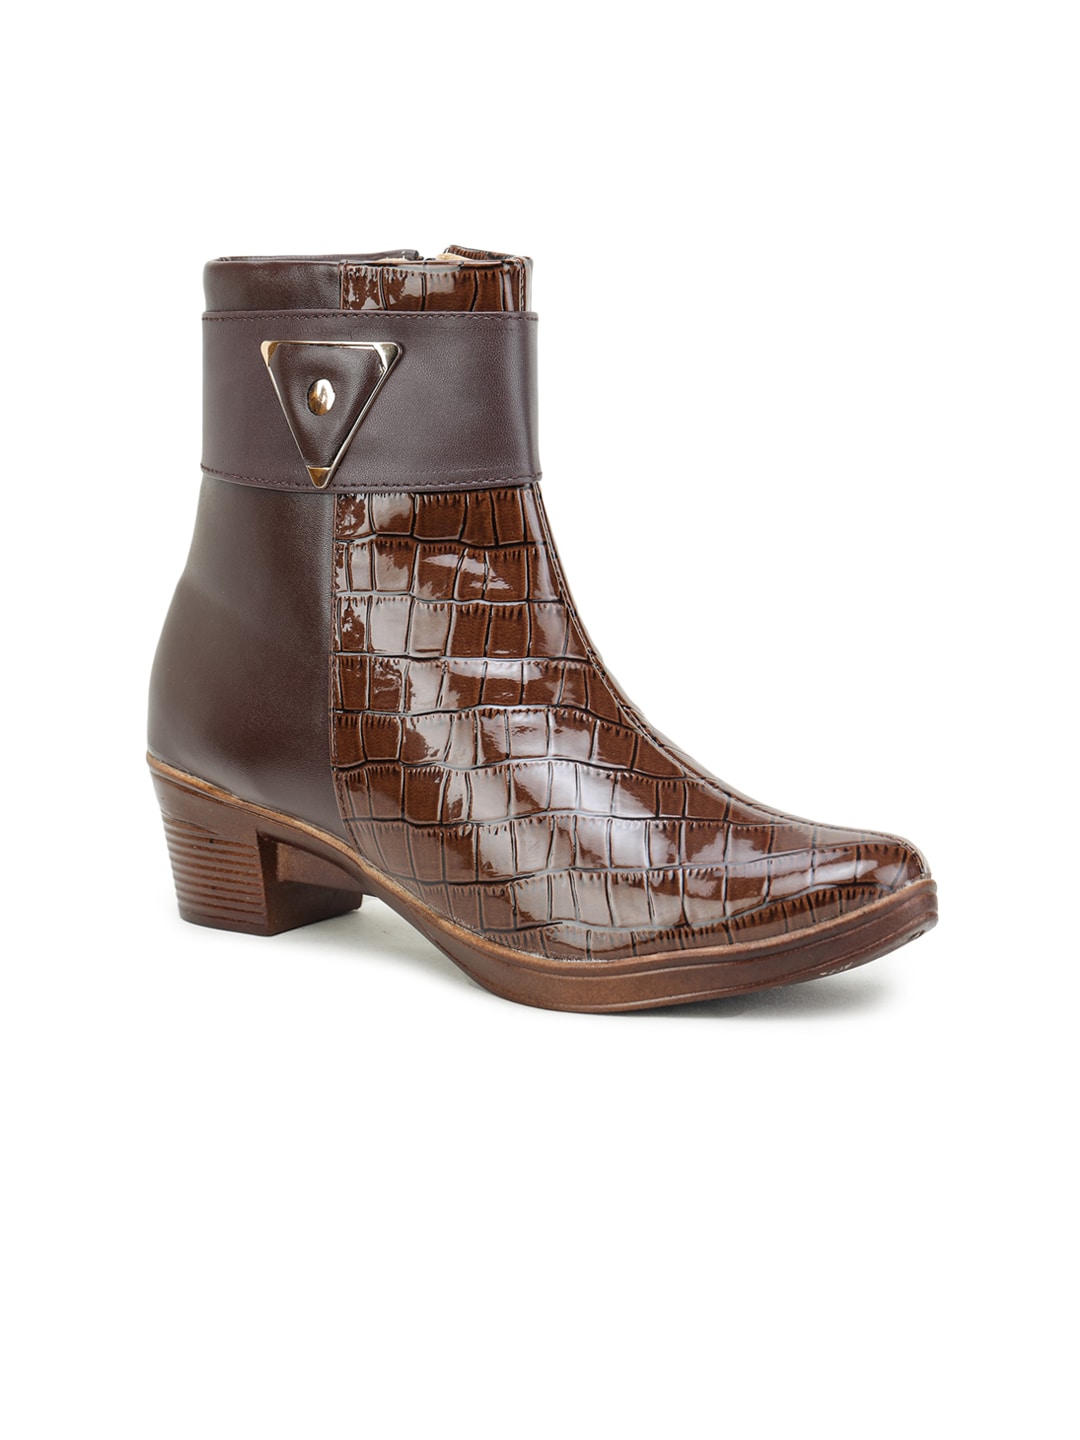 TRASE Brown Textured Block Heeled Boots with Buckles Price in India